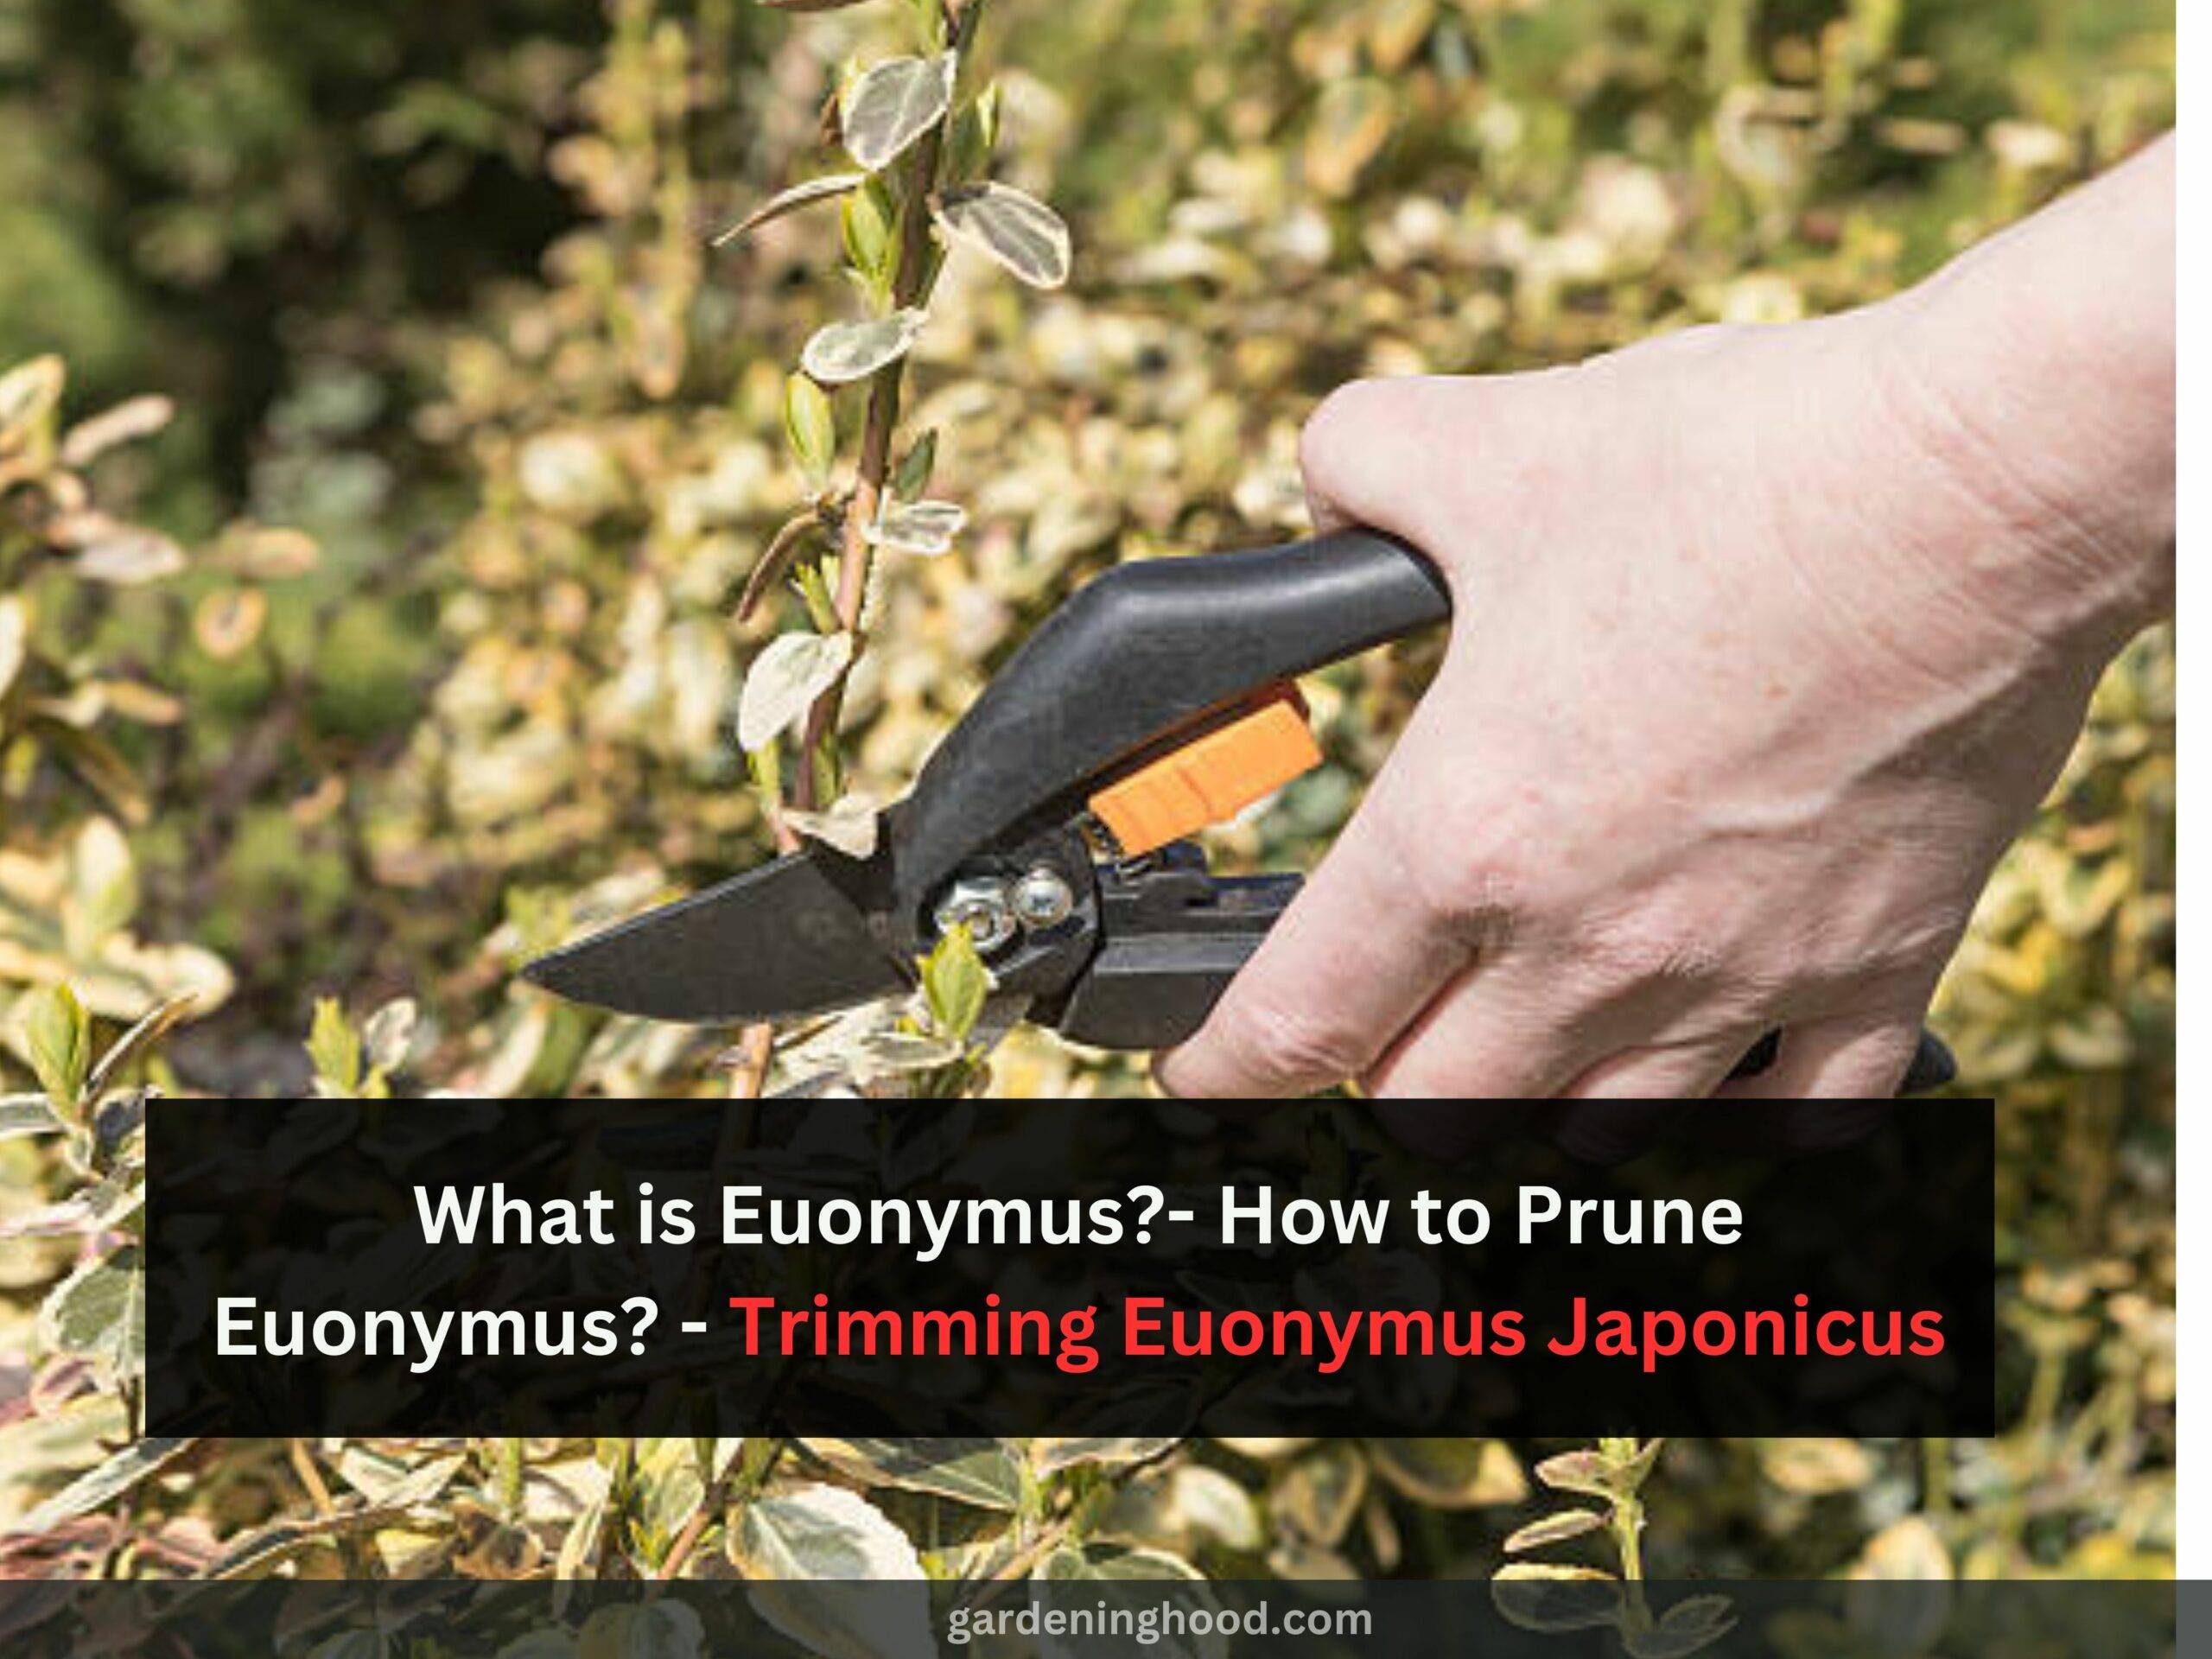 What is Euonymus?- How to Prune Euonymus? - Trimming Euonymus Japonicus